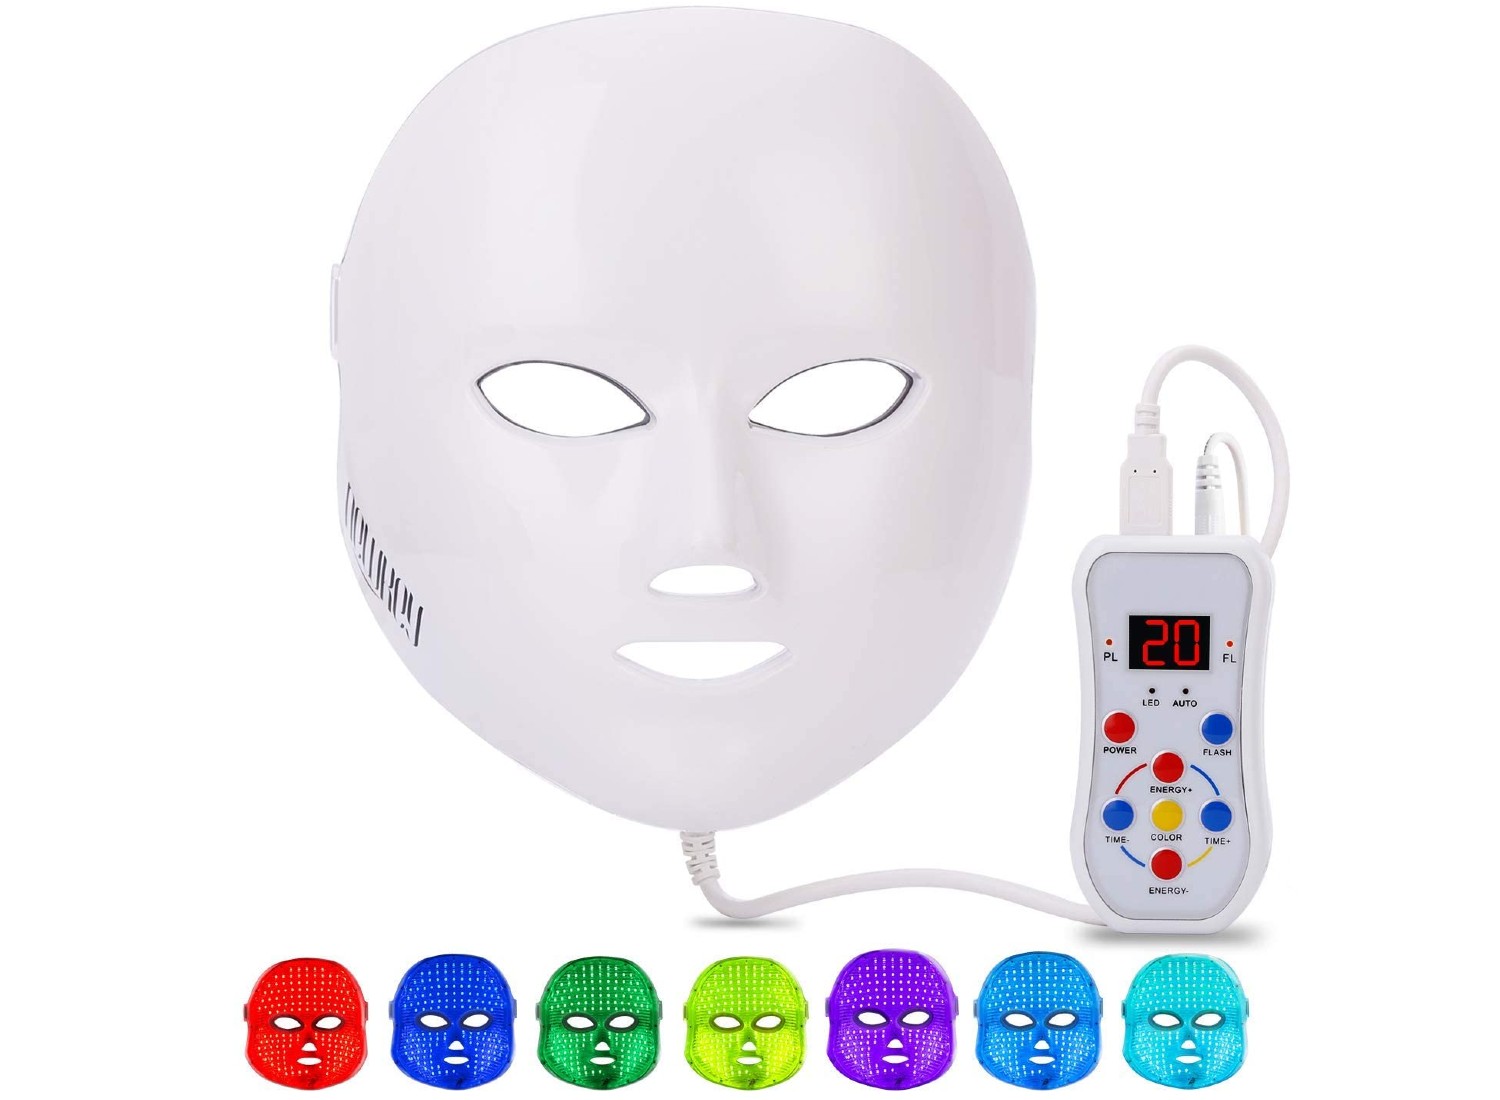 Light Therapy LED face masks